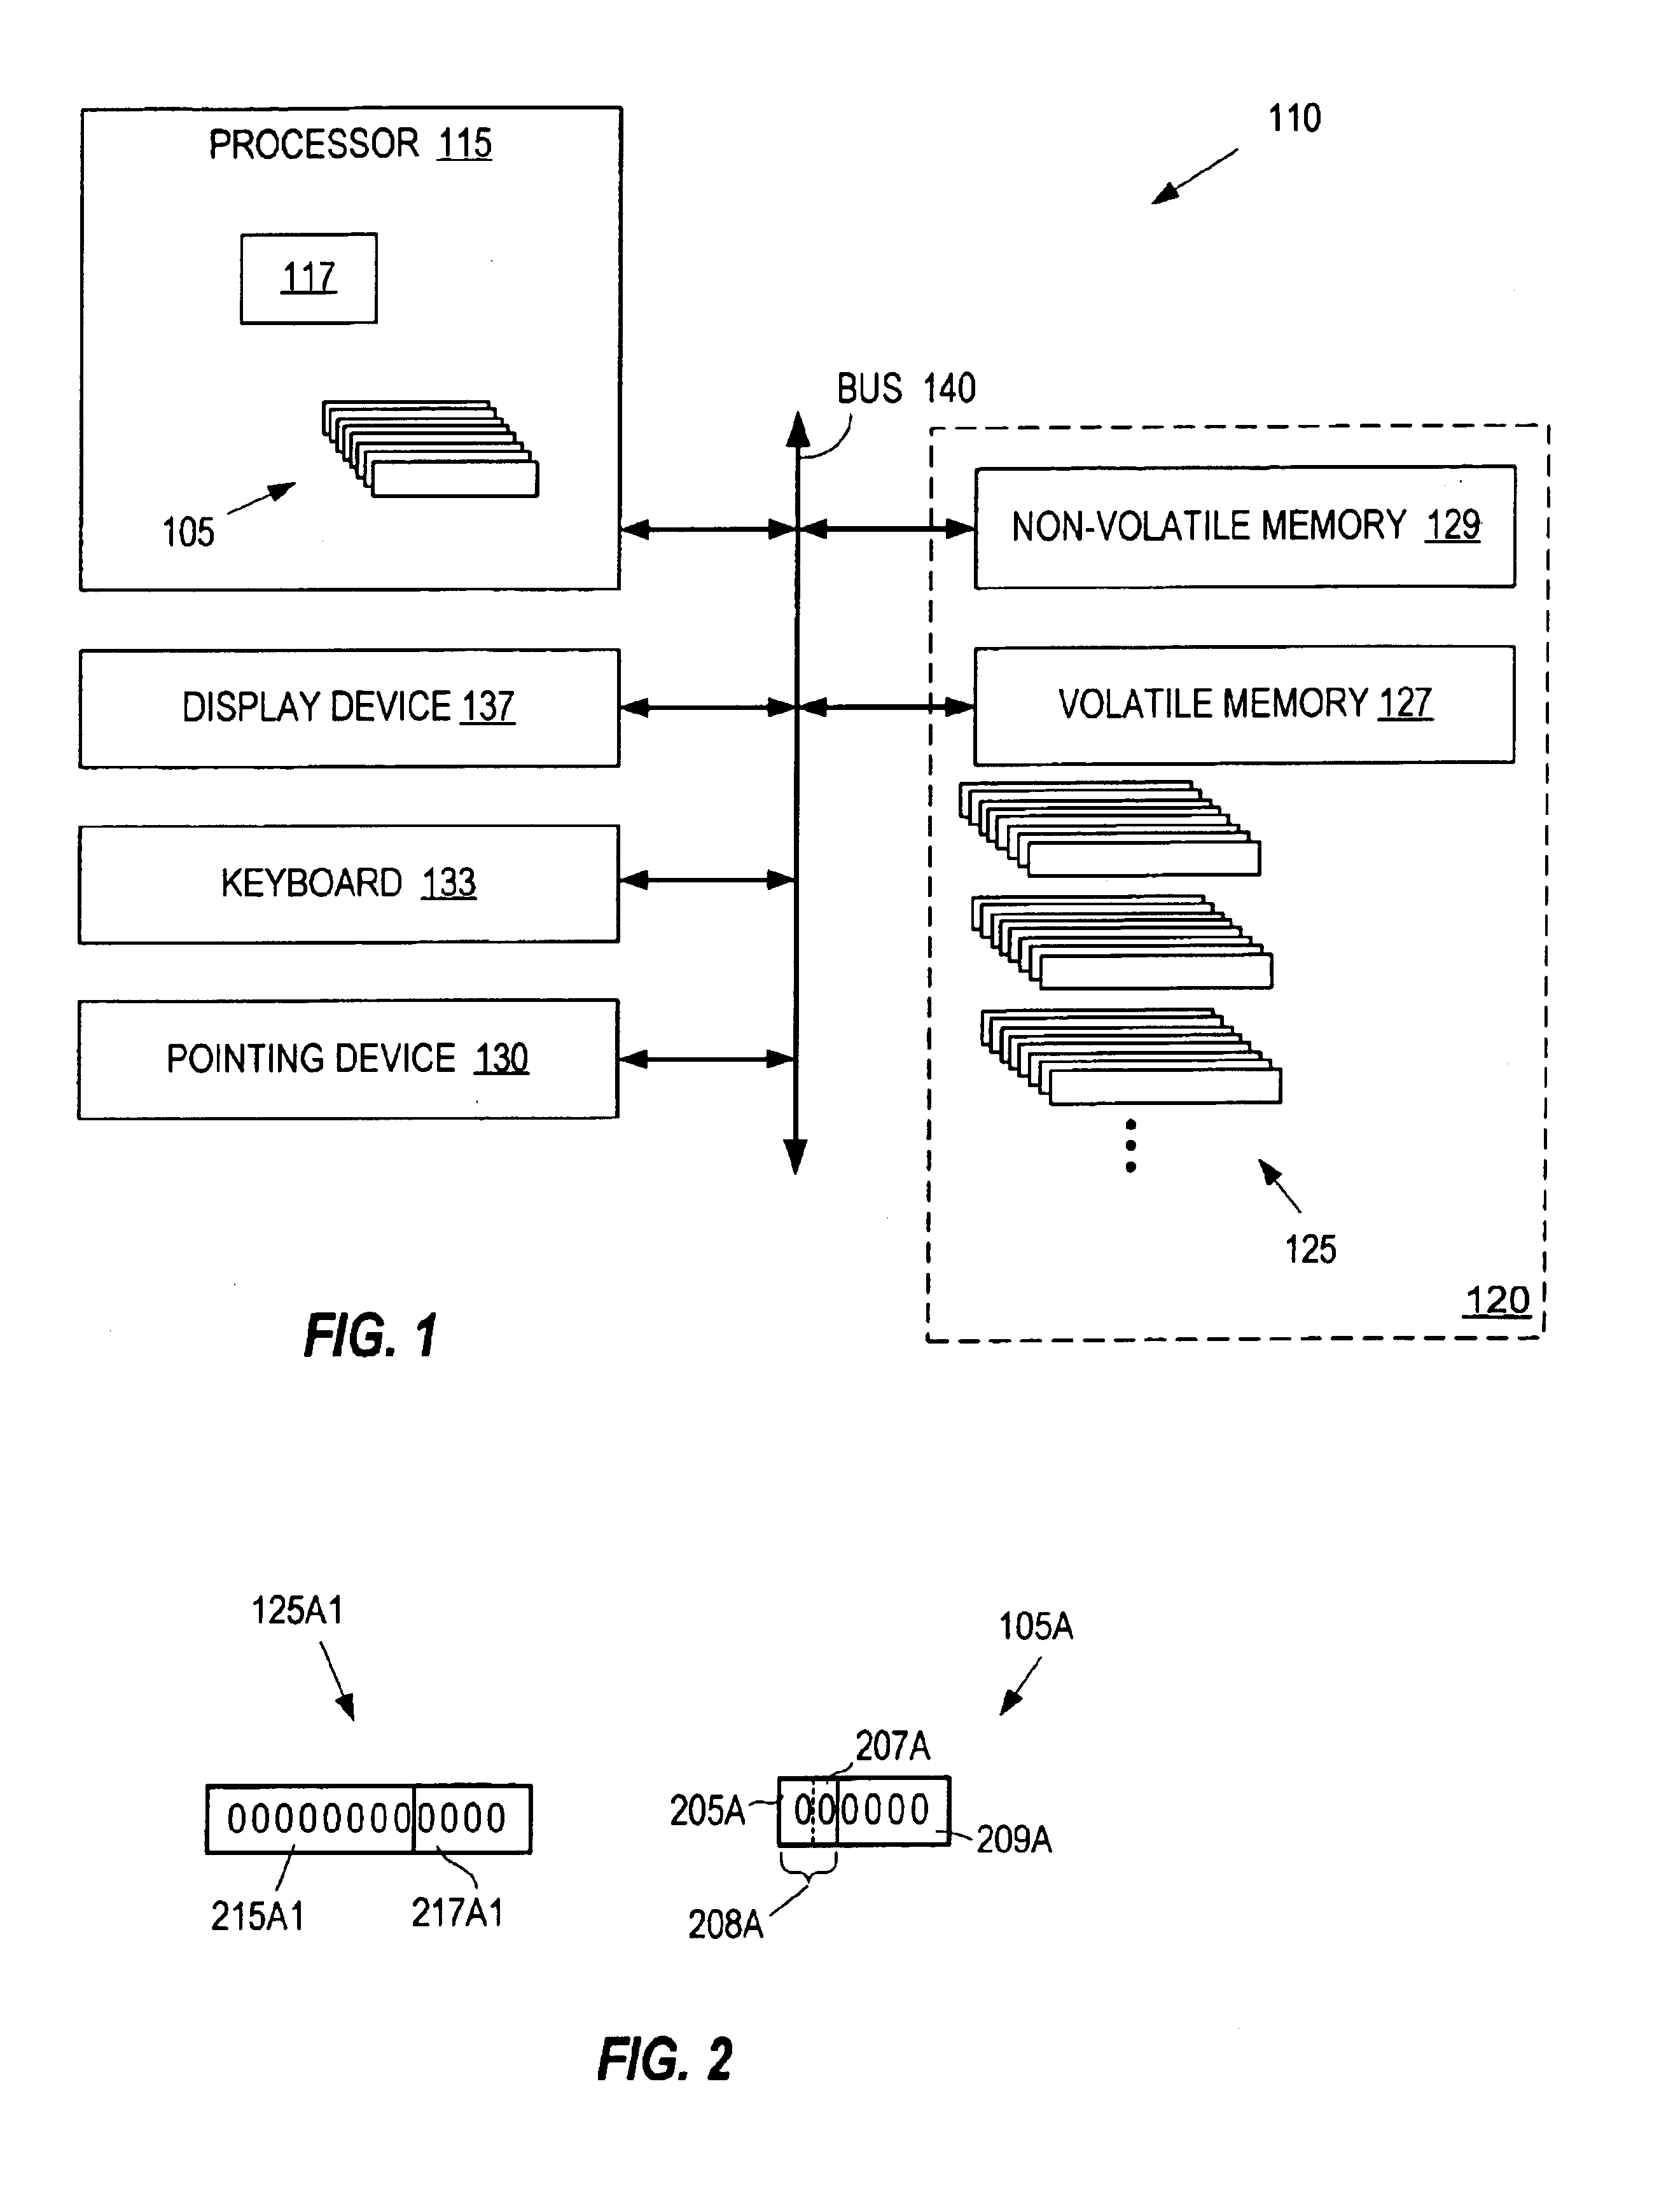 Method, apparatus and computer program product for efficient per thread performance information